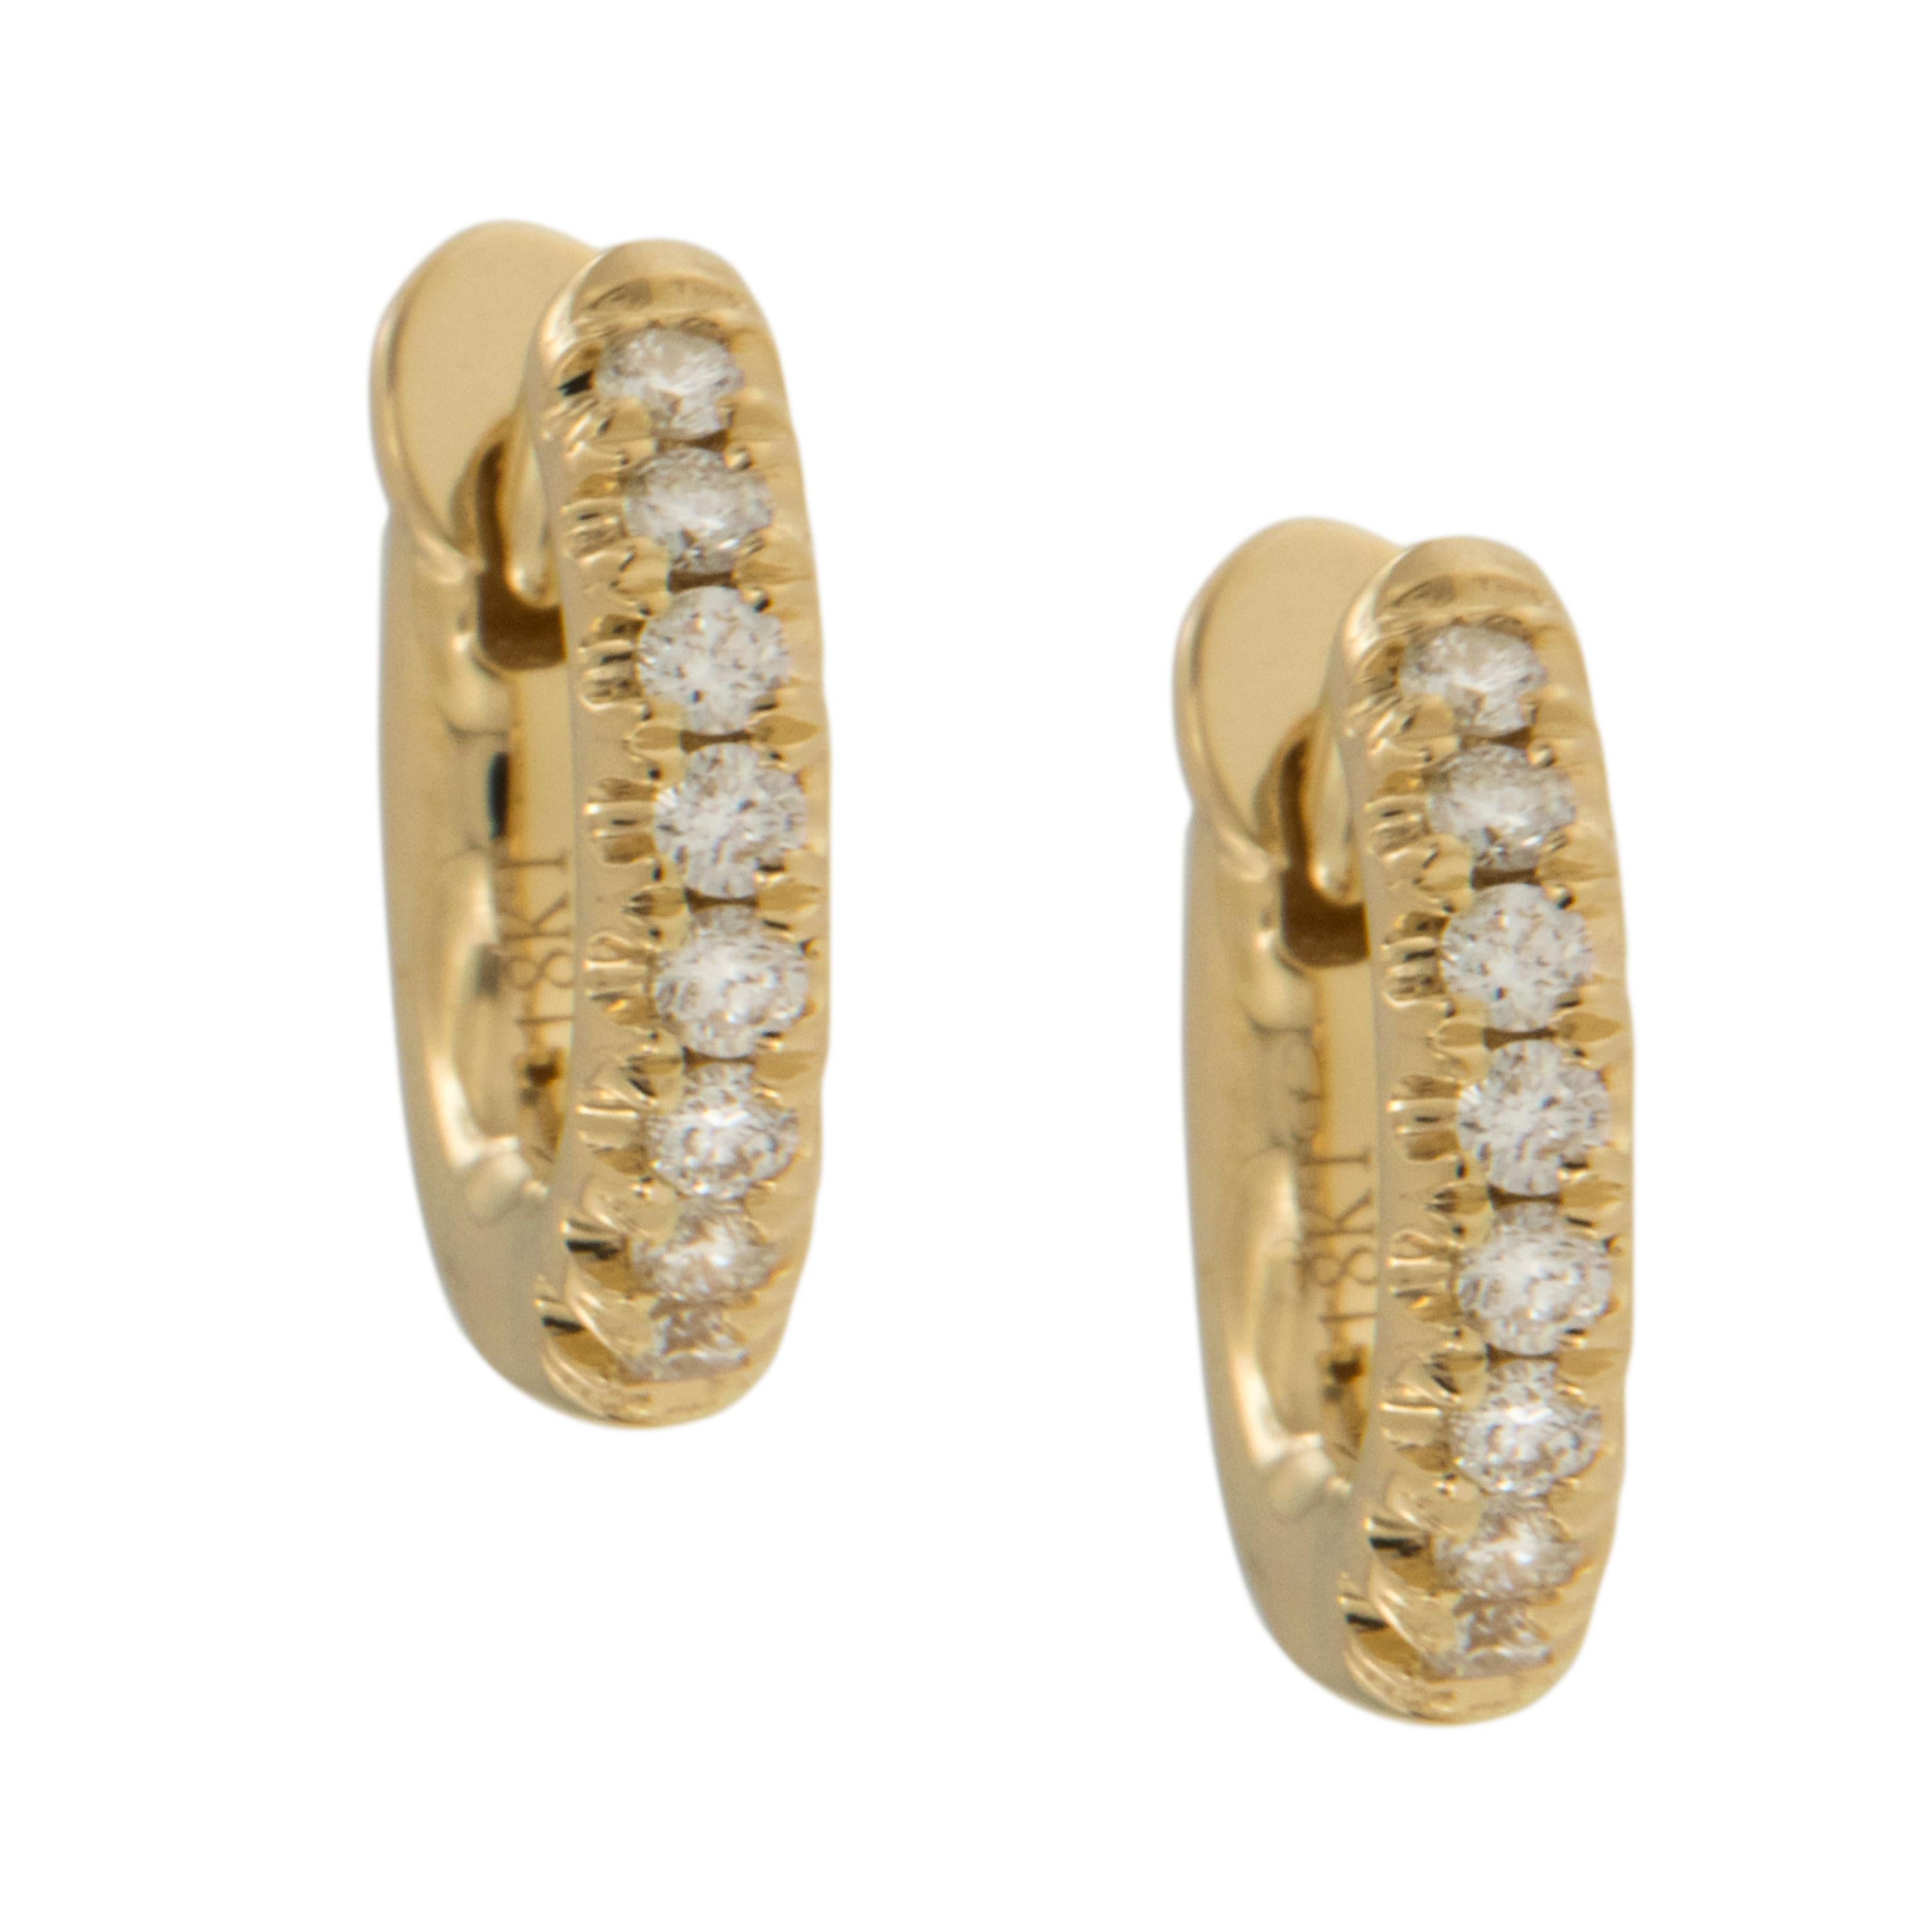 How adorable are these diamond hoop earrings? Perfect for every day wear or the office, especially with no backing to poke your neck! Made from royal 18 karat yellow gold these mini diamond huggy hoops are set with 0.12 Cttw diamonds. They are 2mm